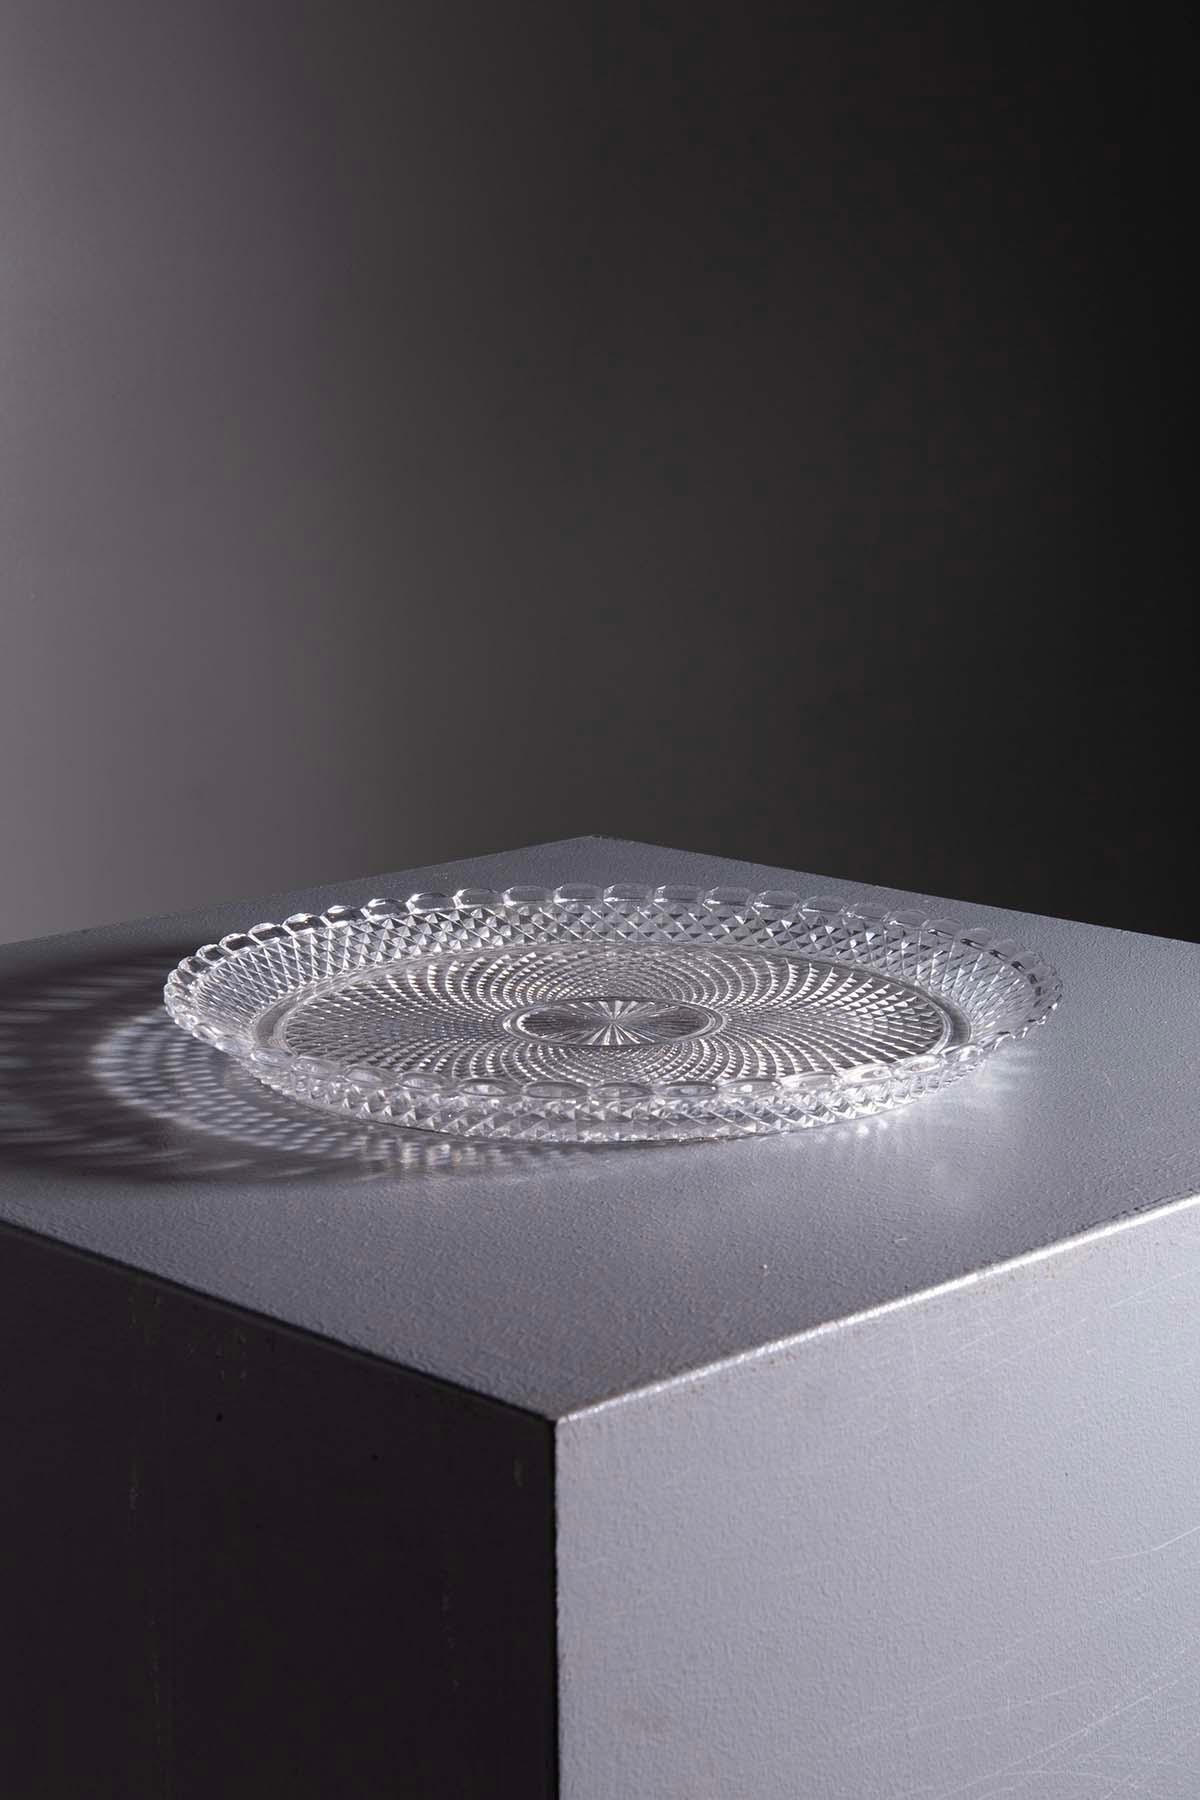 Welcome to the Fascinating World of Crystal Artistry with this Extraordinary Baccarat Crystal Serving Plate from the '70s.
Originally hailing from a sumptuous Milanese residence, this one-of-a-kind piece captures the essence of timeless